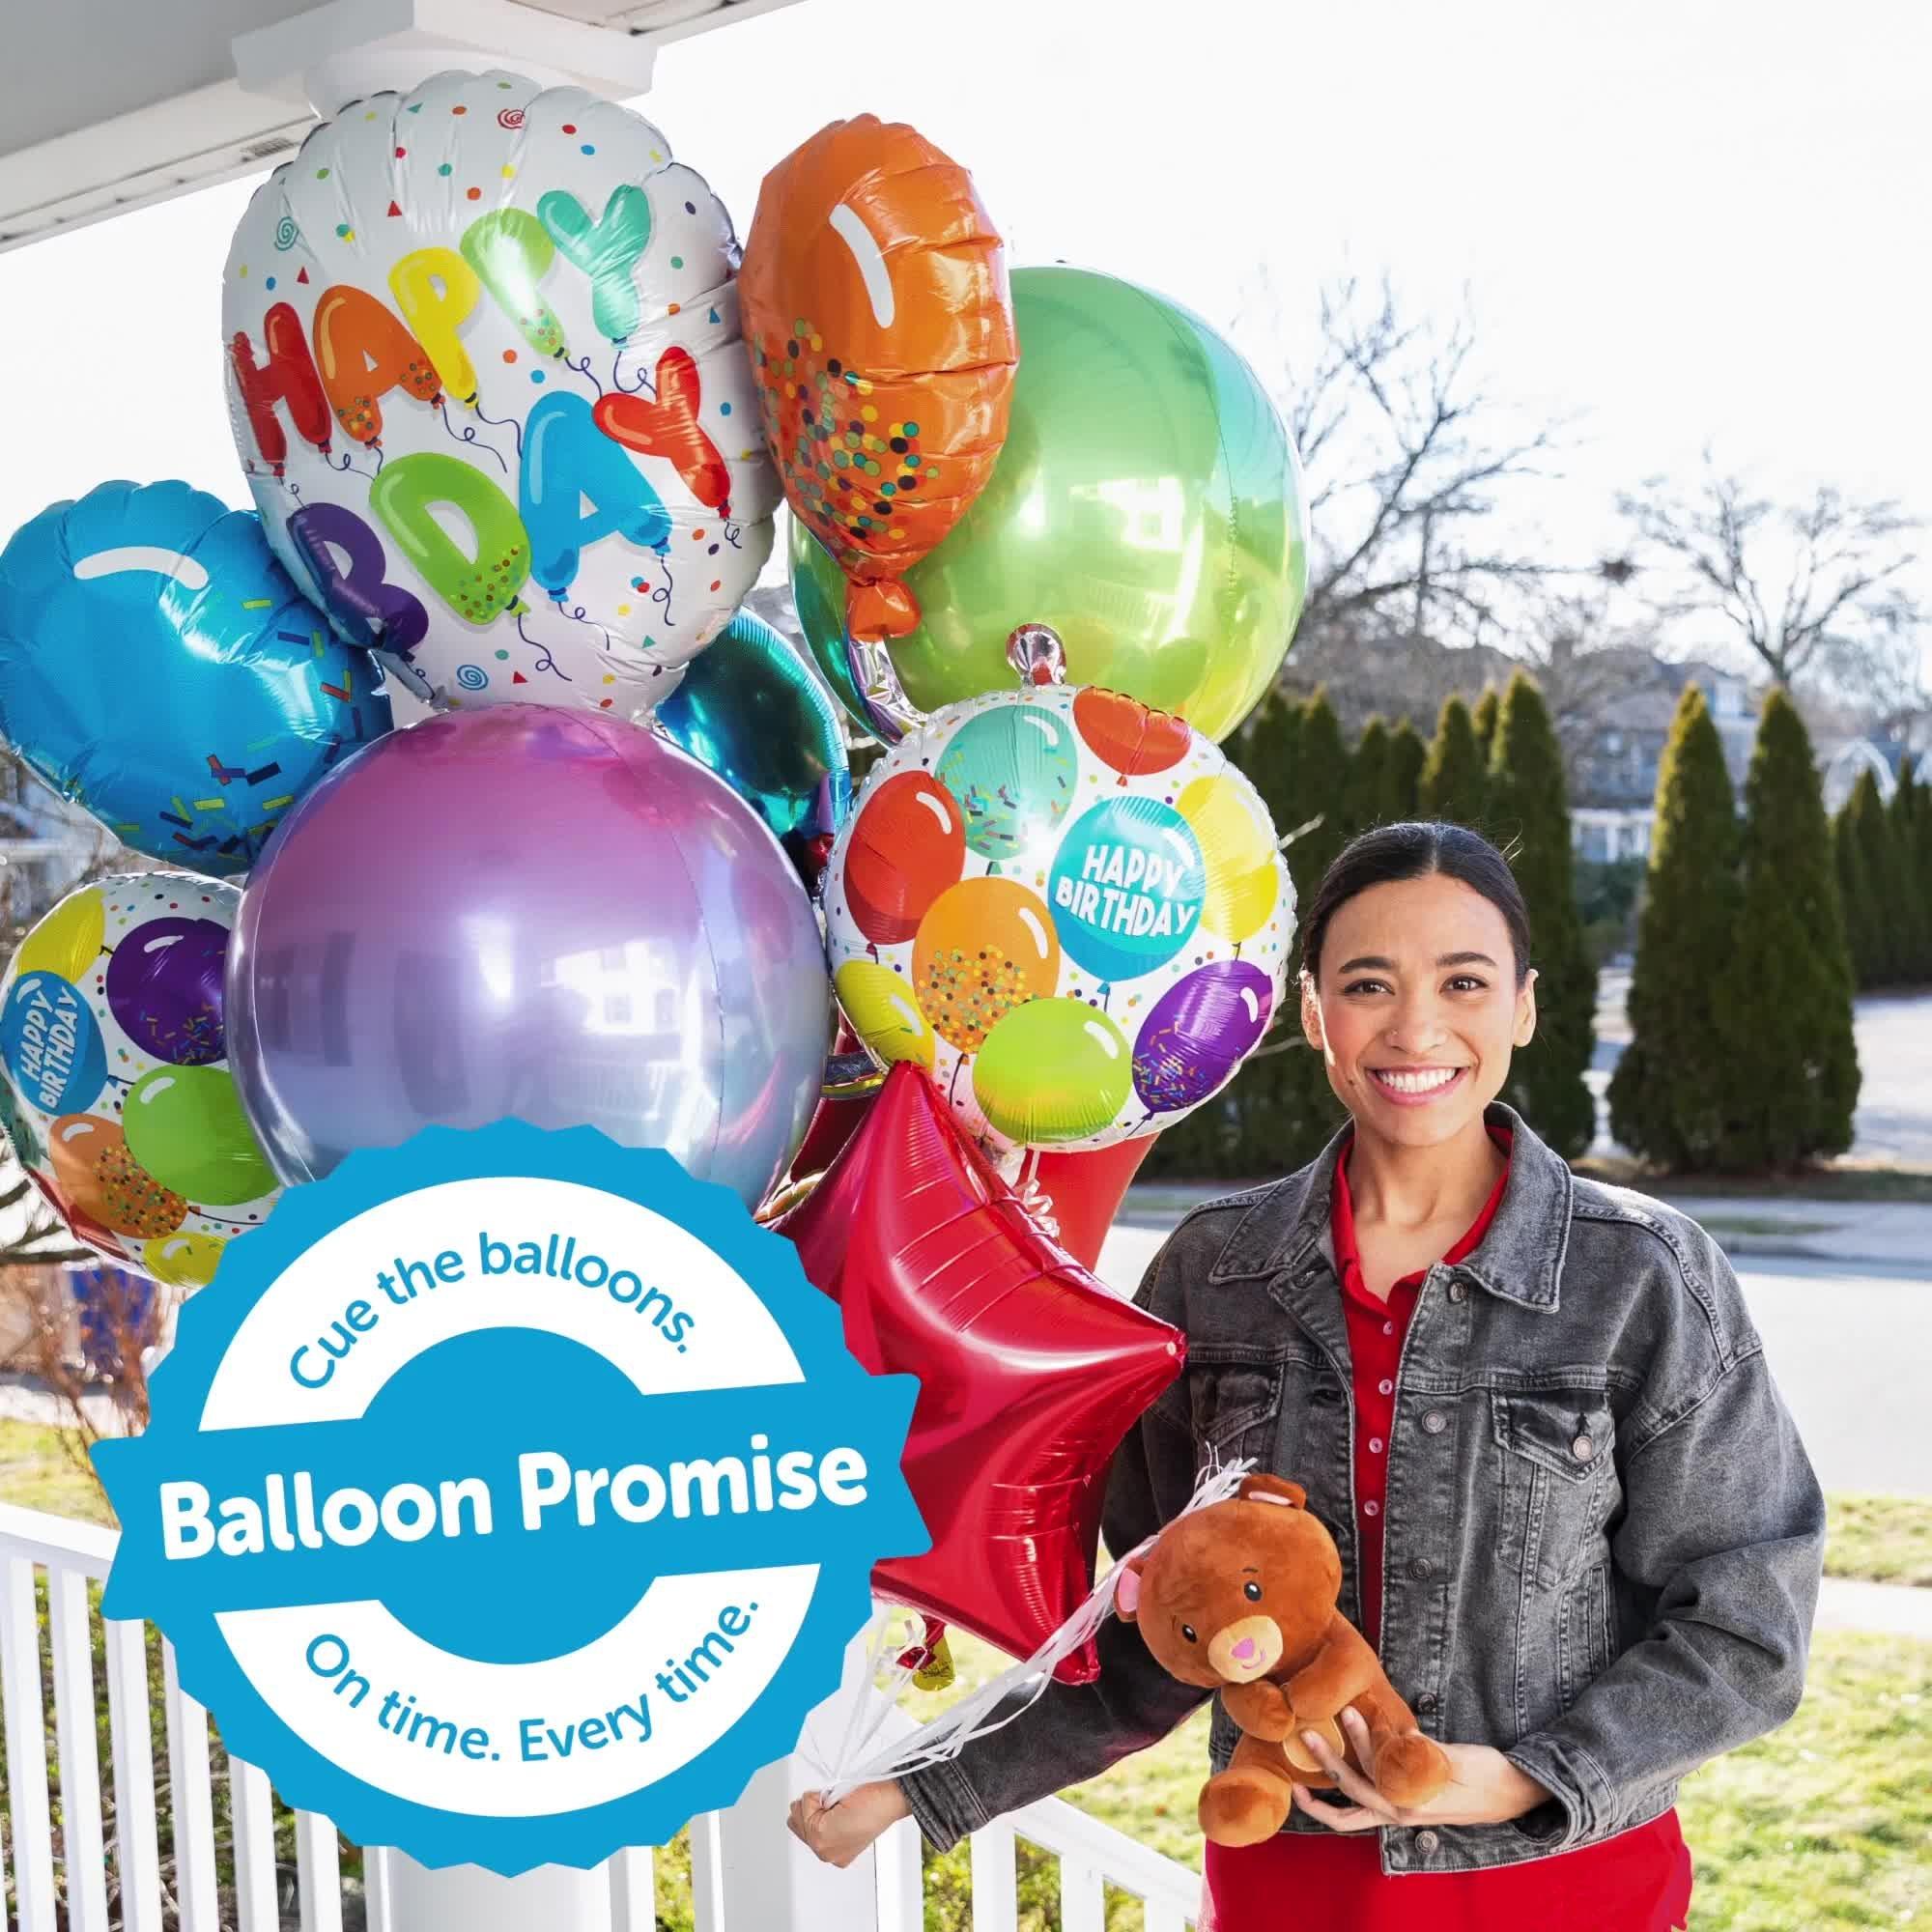 Premium Día del Padre Foil Balloon Bouquet with Balloon Weight, 13pc